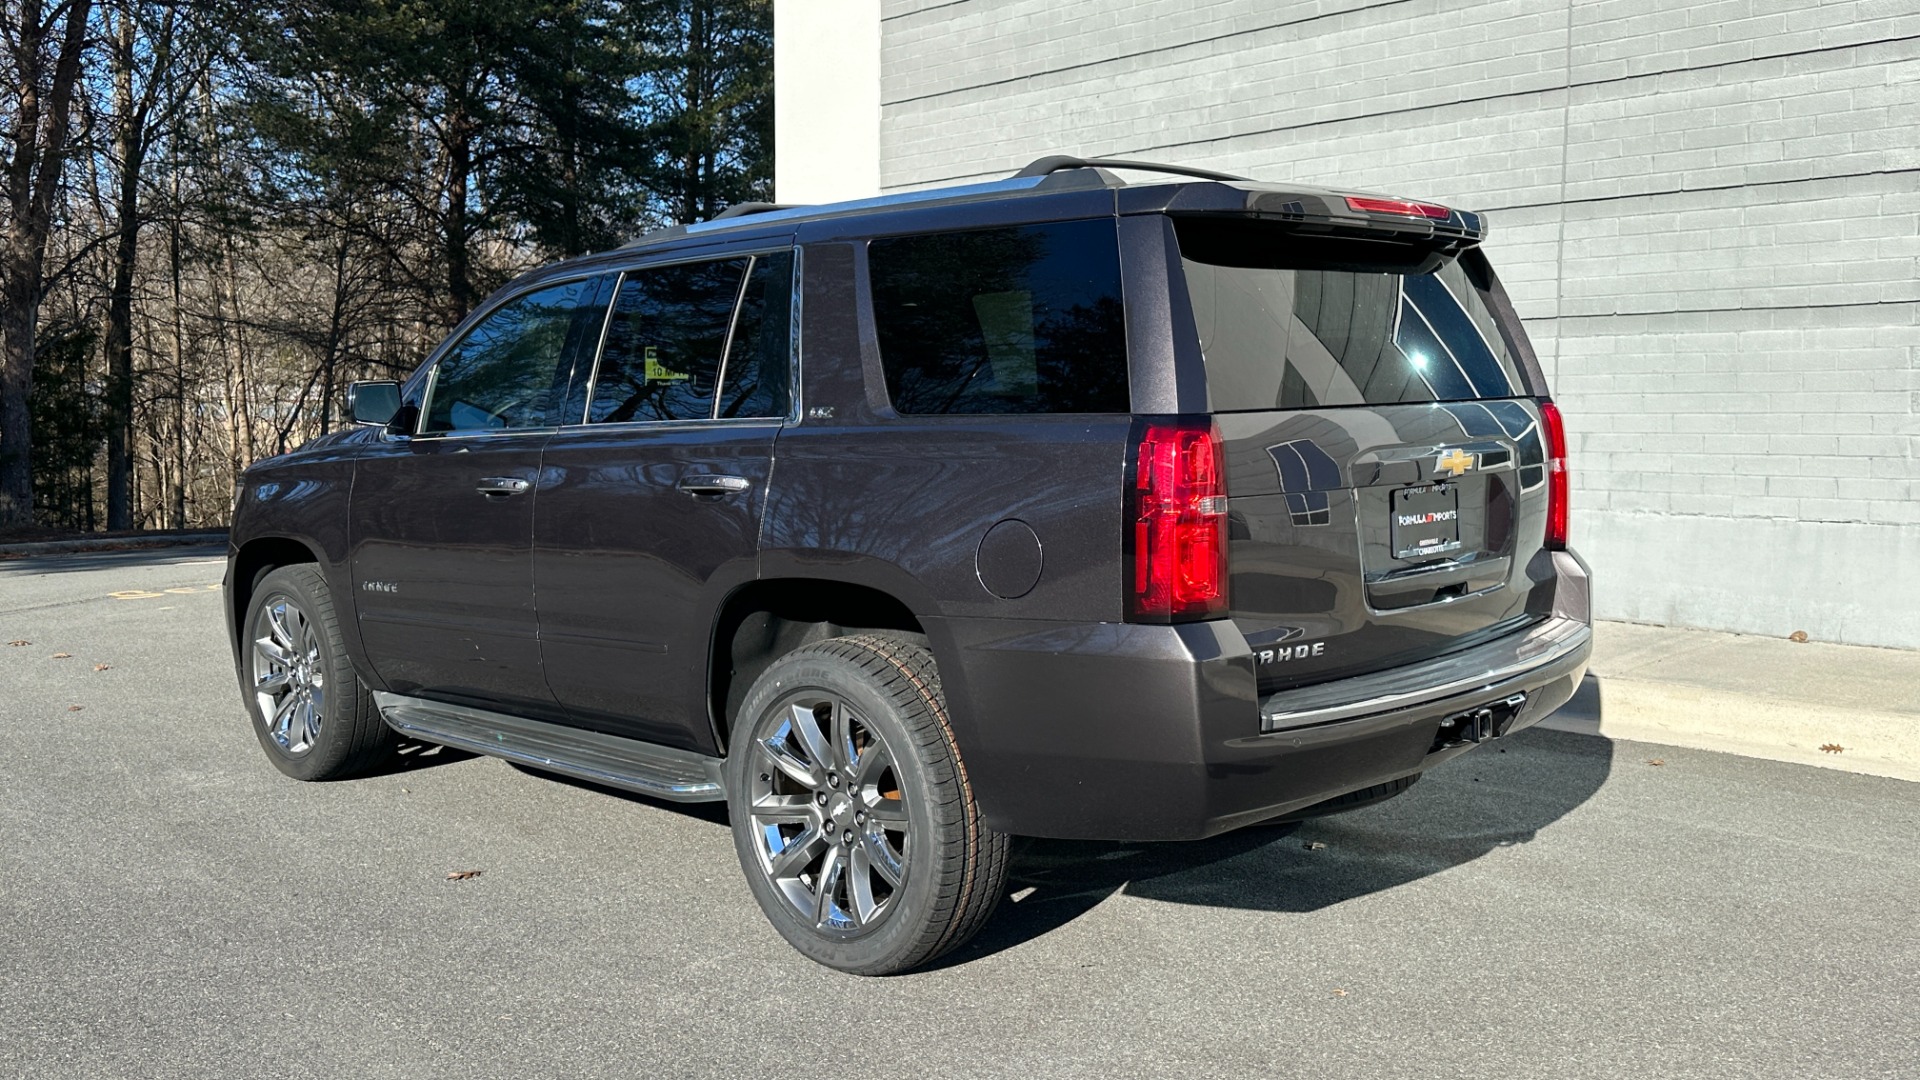 Used 2016 Chevrolet Tahoe LTZ / NAVIGATION / LEATHER / 4WD / 22IN WHEELS / REAR ENTERTAINMENT for sale $38,500 at Formula Imports in Charlotte NC 28227 4